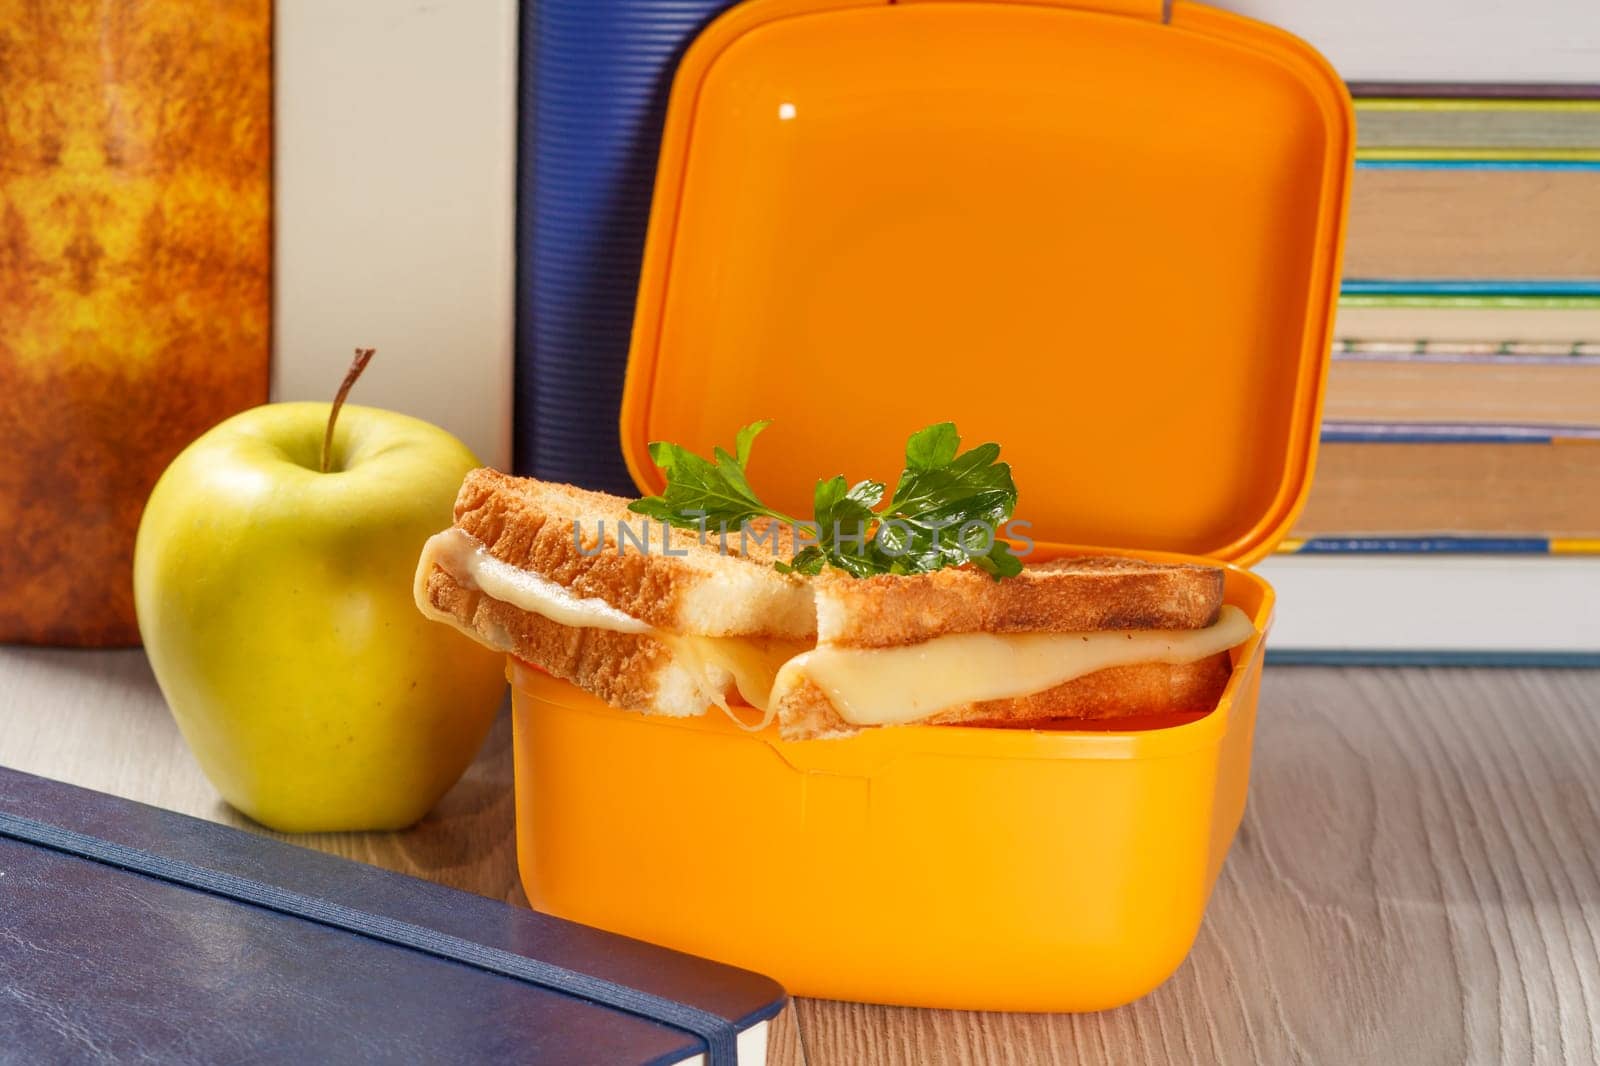 Lunch box with toasted slices of bread, cheese and green parsley, green apple and hardback books on the background. by mvg6894